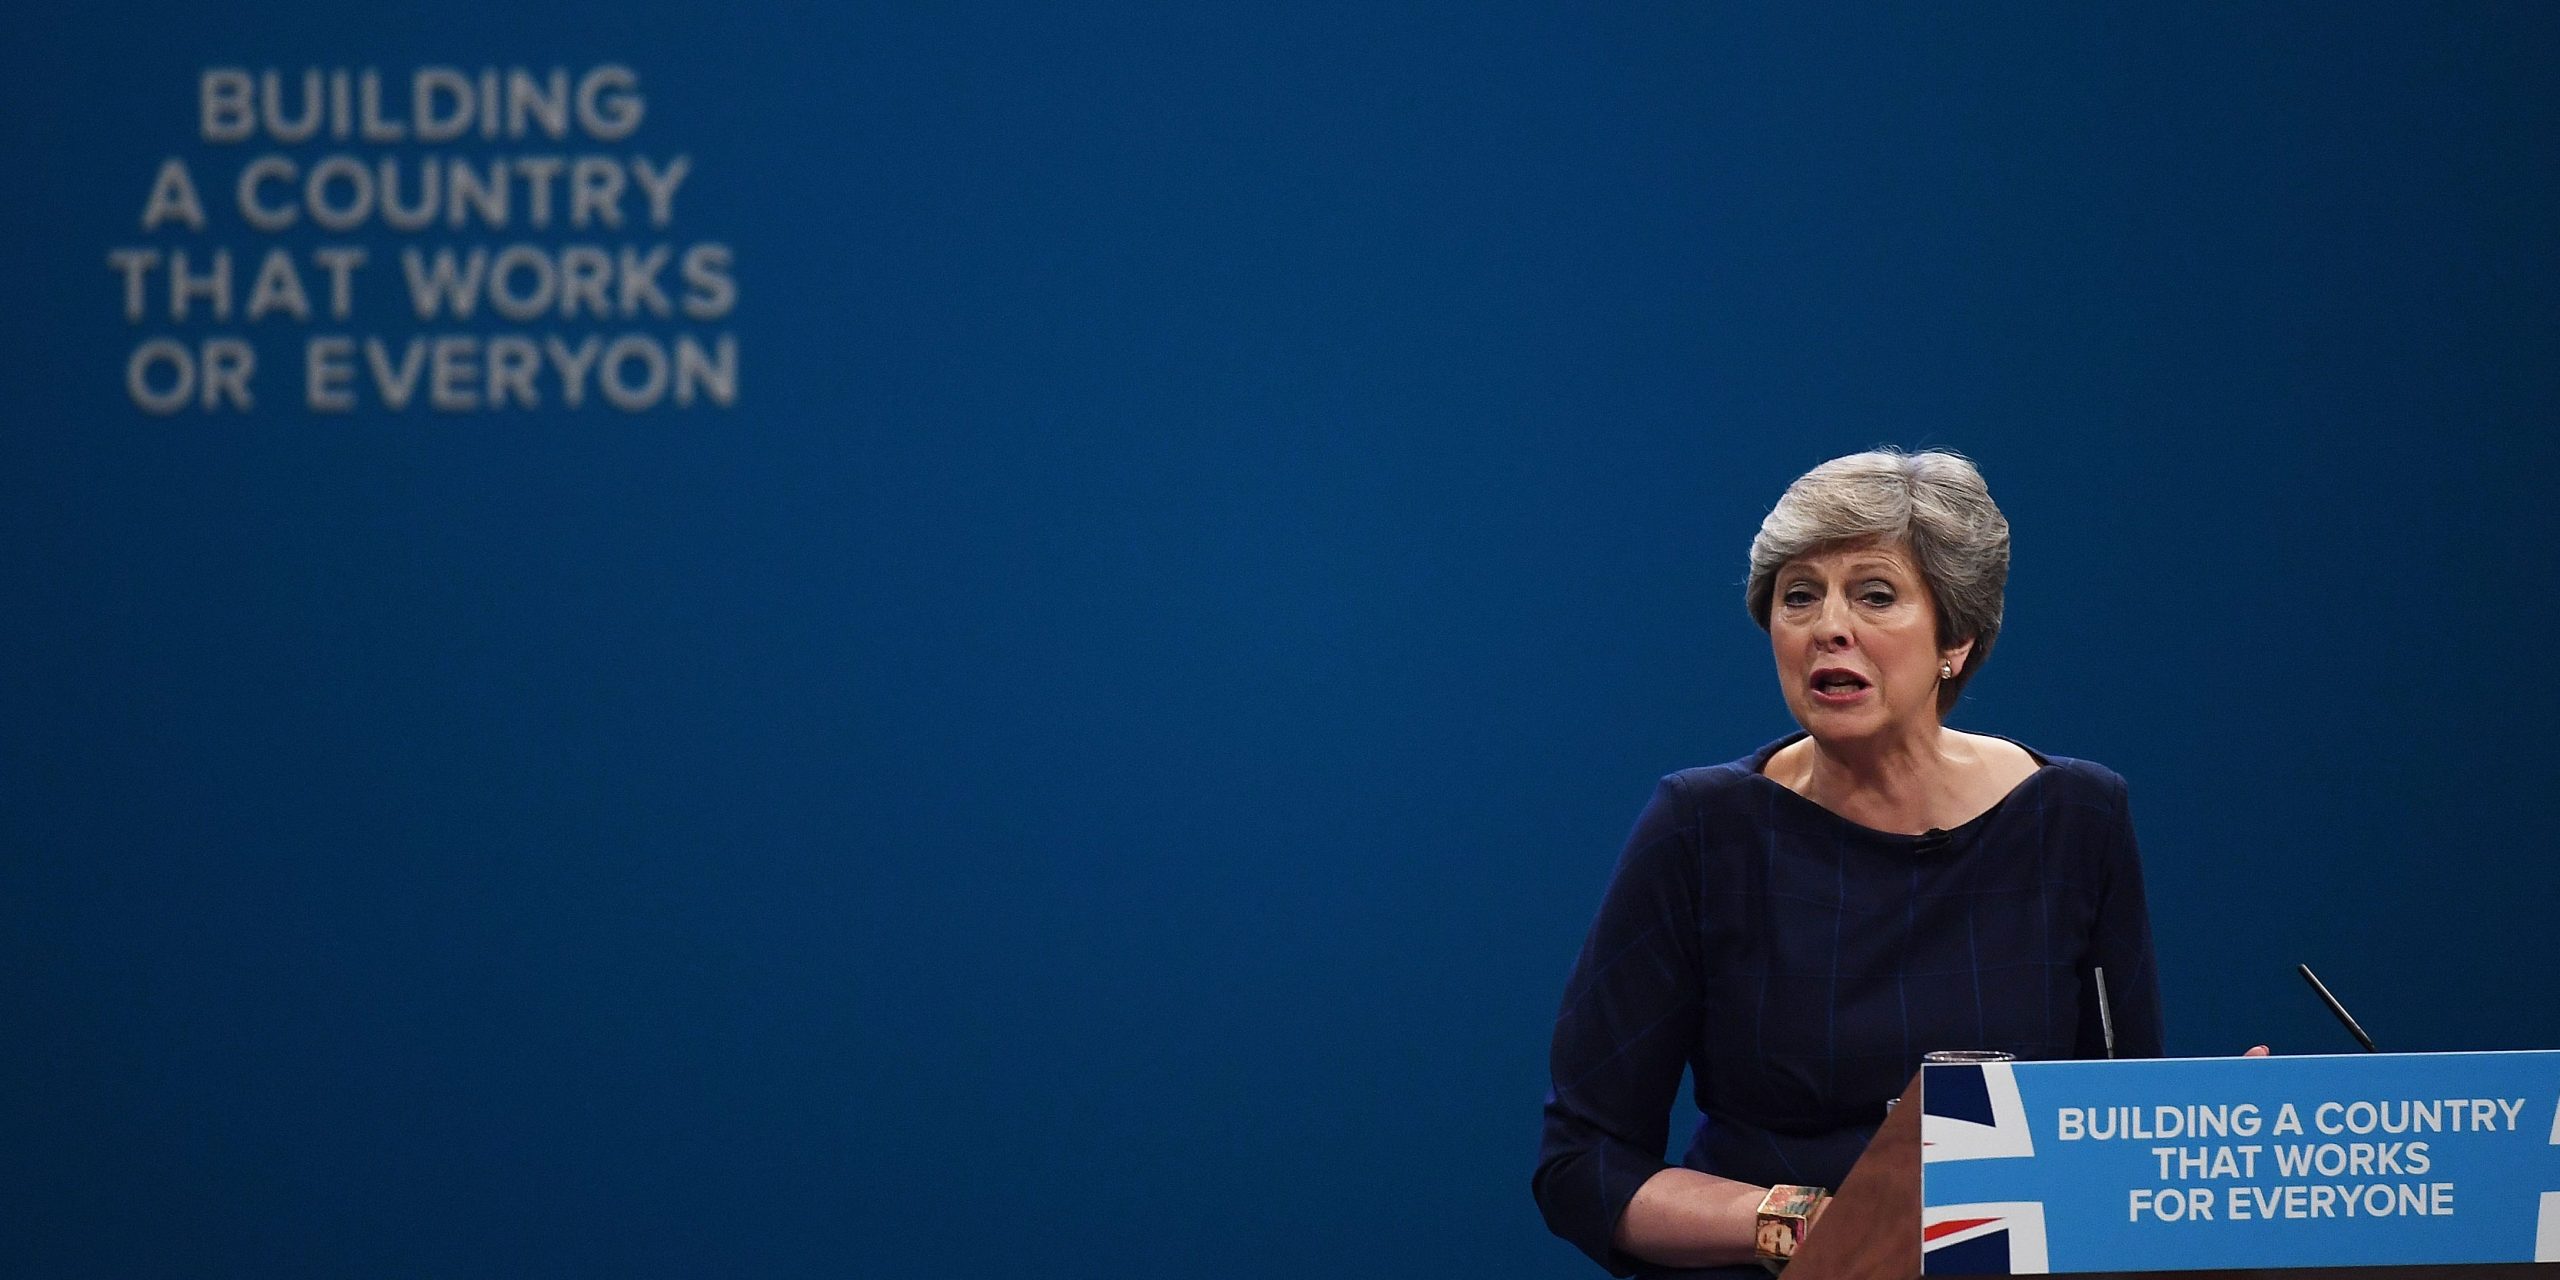 Letters begin to fall off the backdrop, “BUILDING A COUNTRY THAT WORKS OR EVERYON” as British Prime Minister Theresa May delivers her keynote speech to delegates and party members on the last day of the Conservative Party Conference at Manchester Central on October 4, 2017 in Manchester, England.